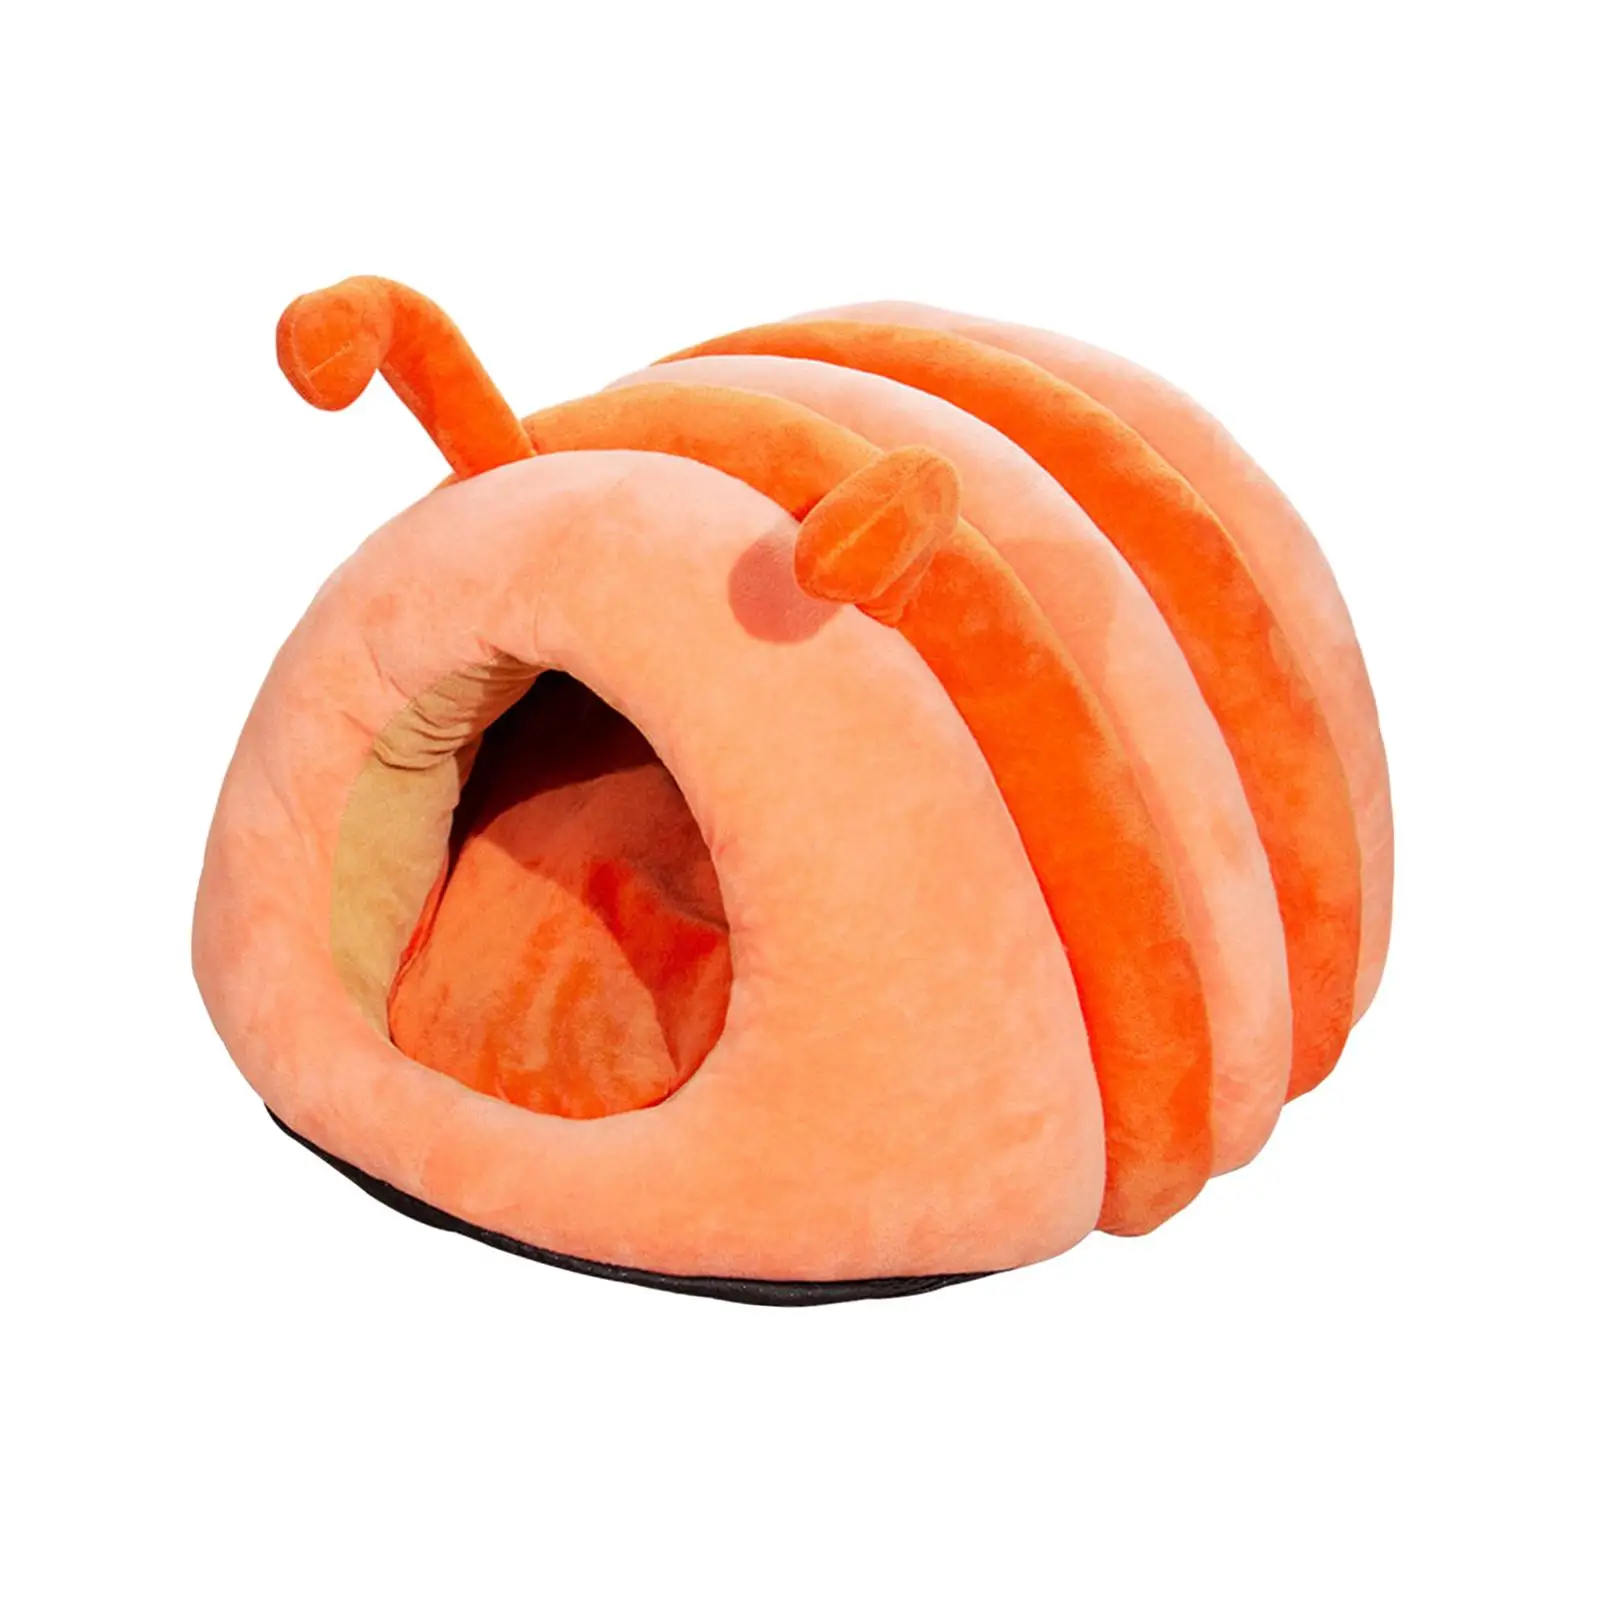 Caterpillar Shape Cat Bed Furniture Portable Anti Slip Bottom No Deformation Cute Kennel Pad Cat Dog House for Indoor Cats Puppy